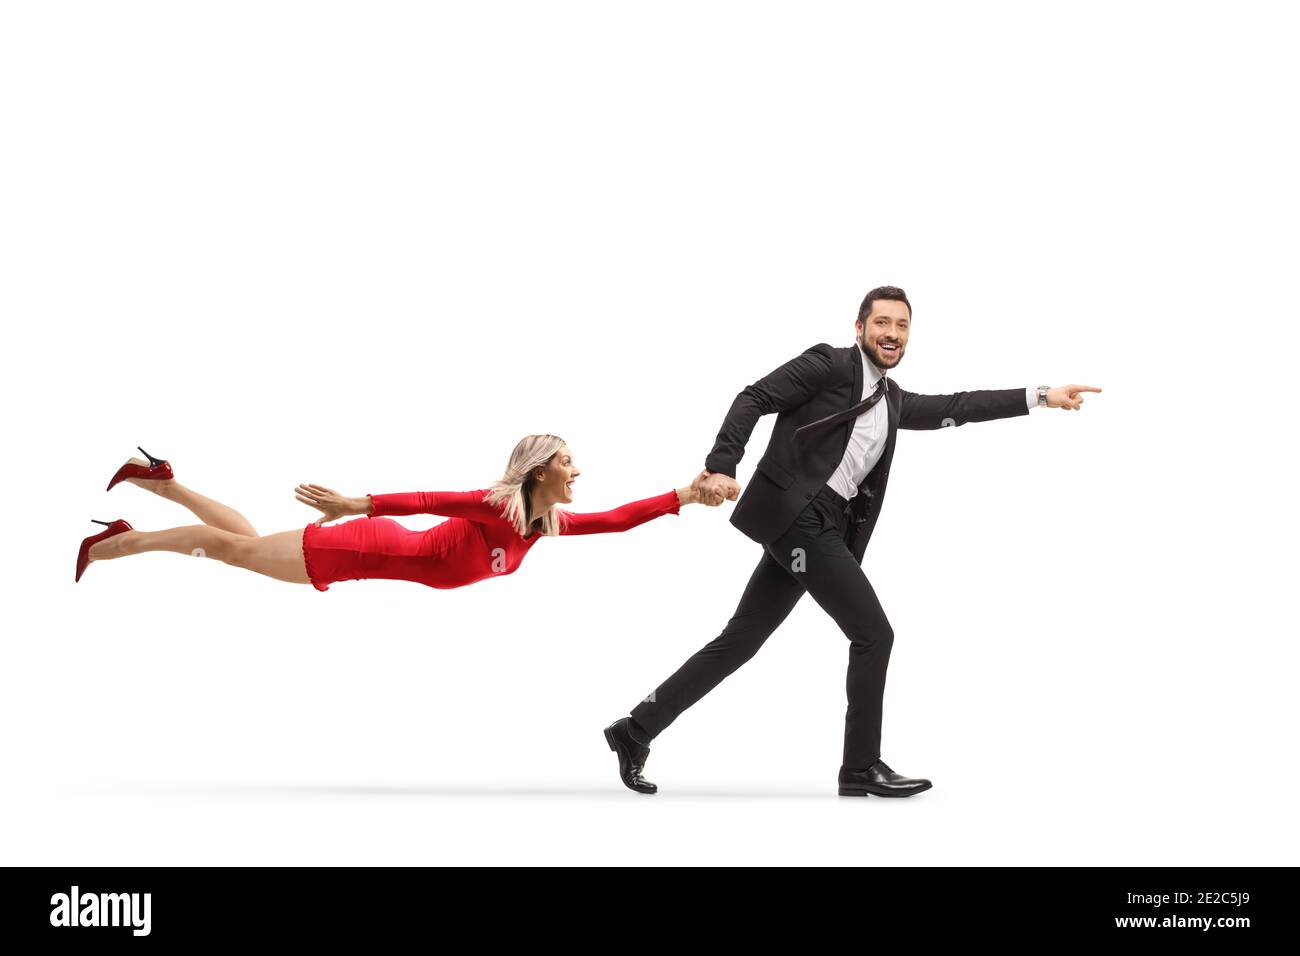 Man in a suit running and pointing and holding a woman in a red dress by her hand isolated on white background Stock Photo